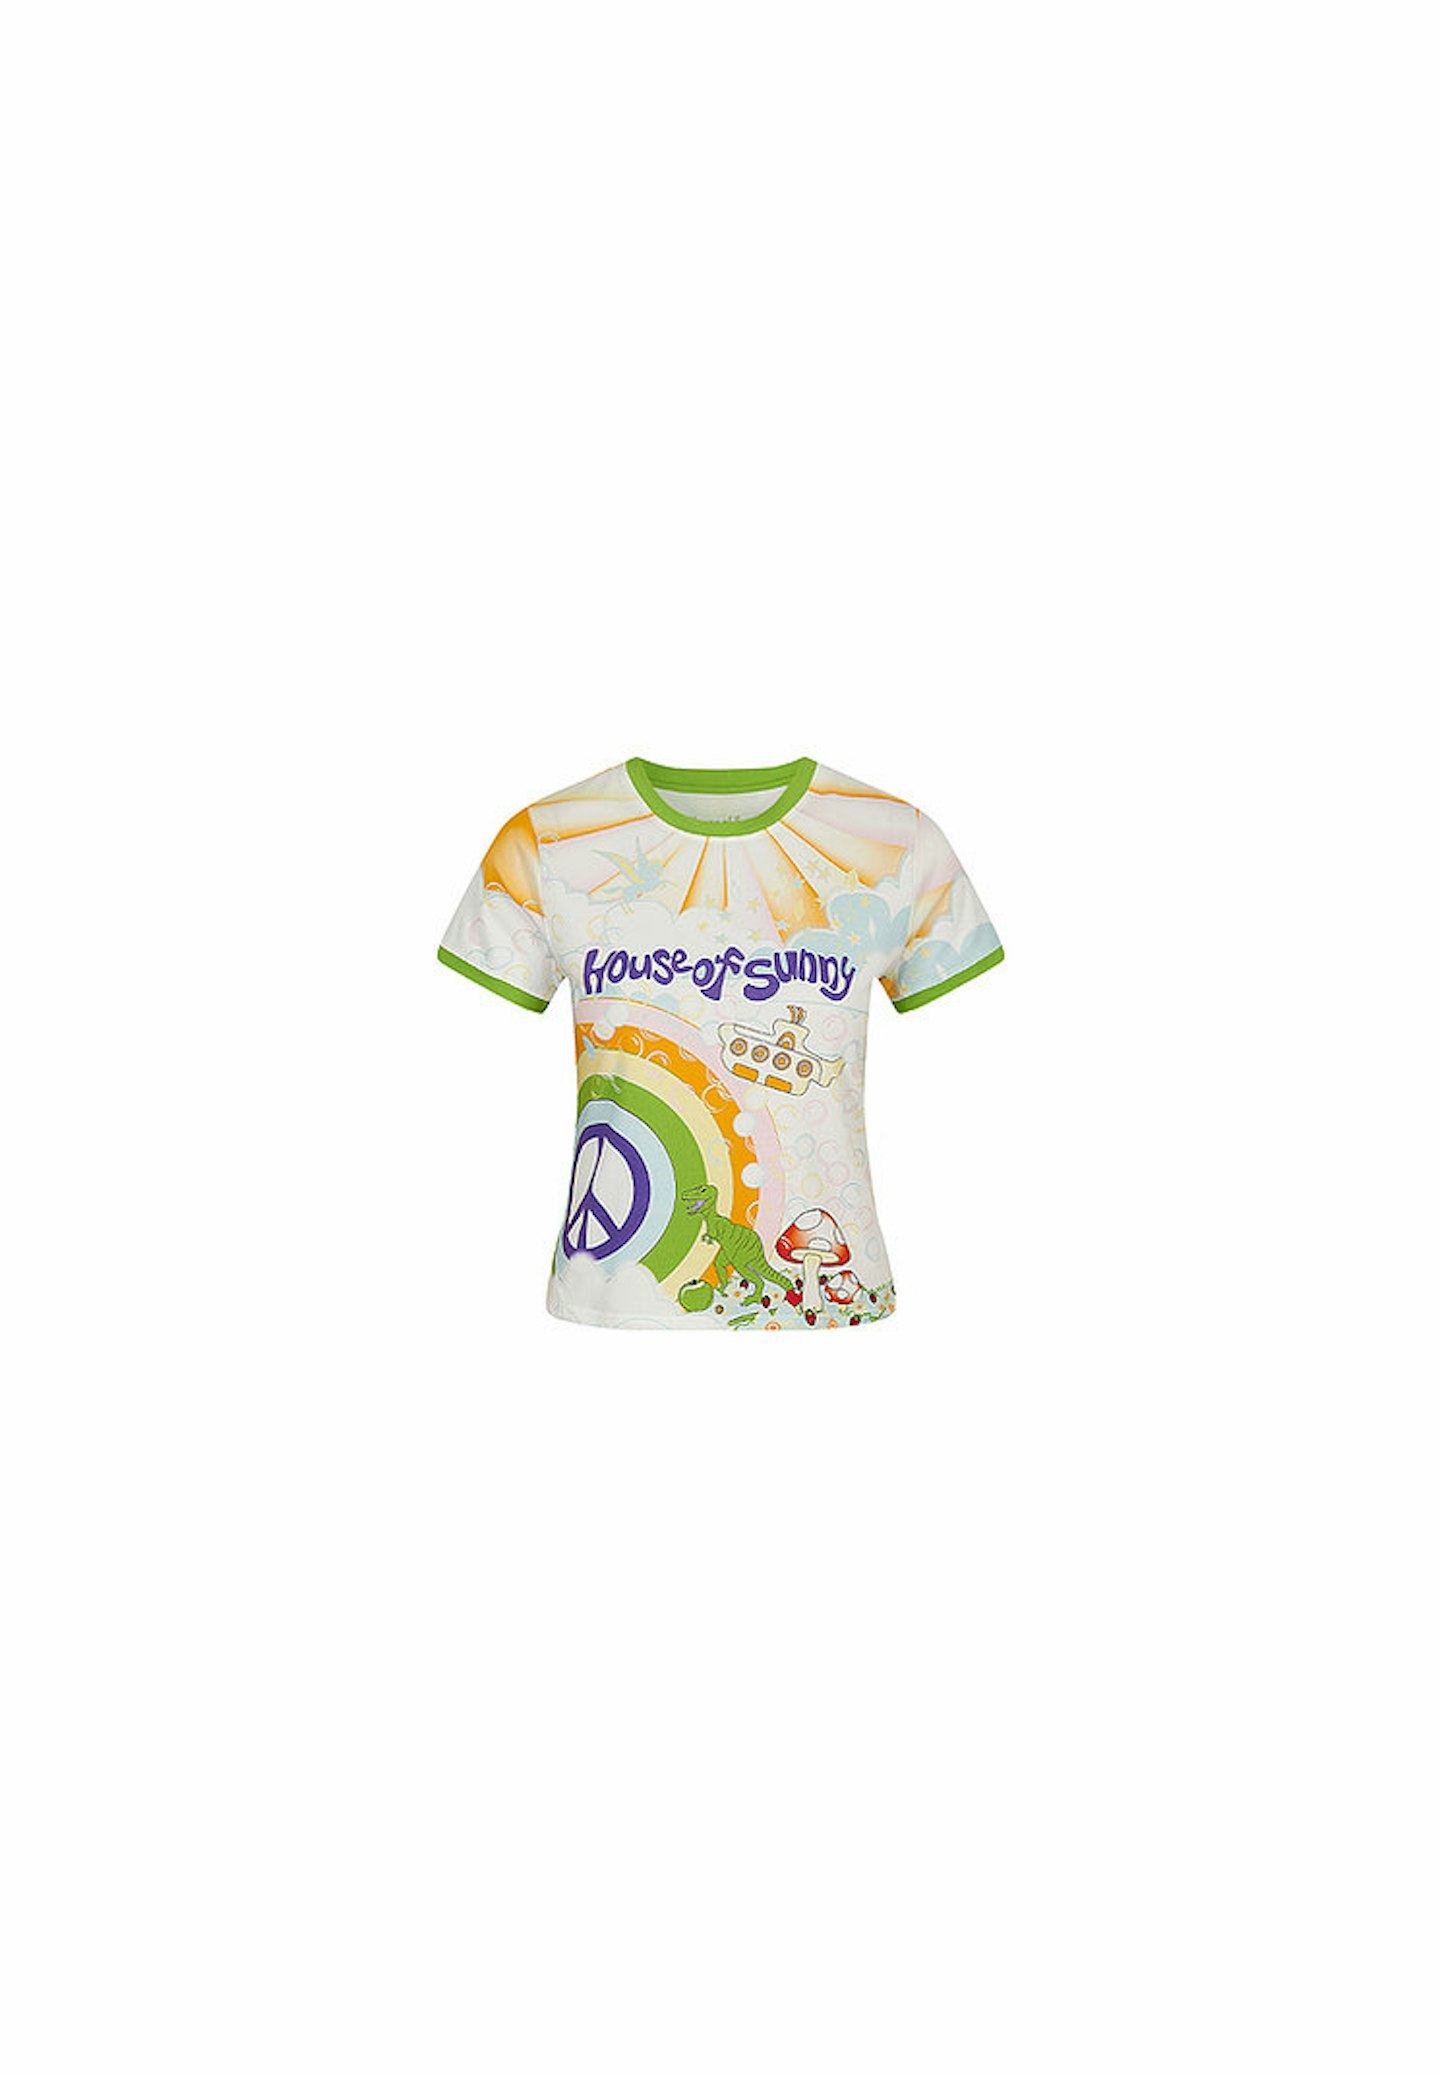 House of Sunny, Pure Imagination T-Shirt, £55